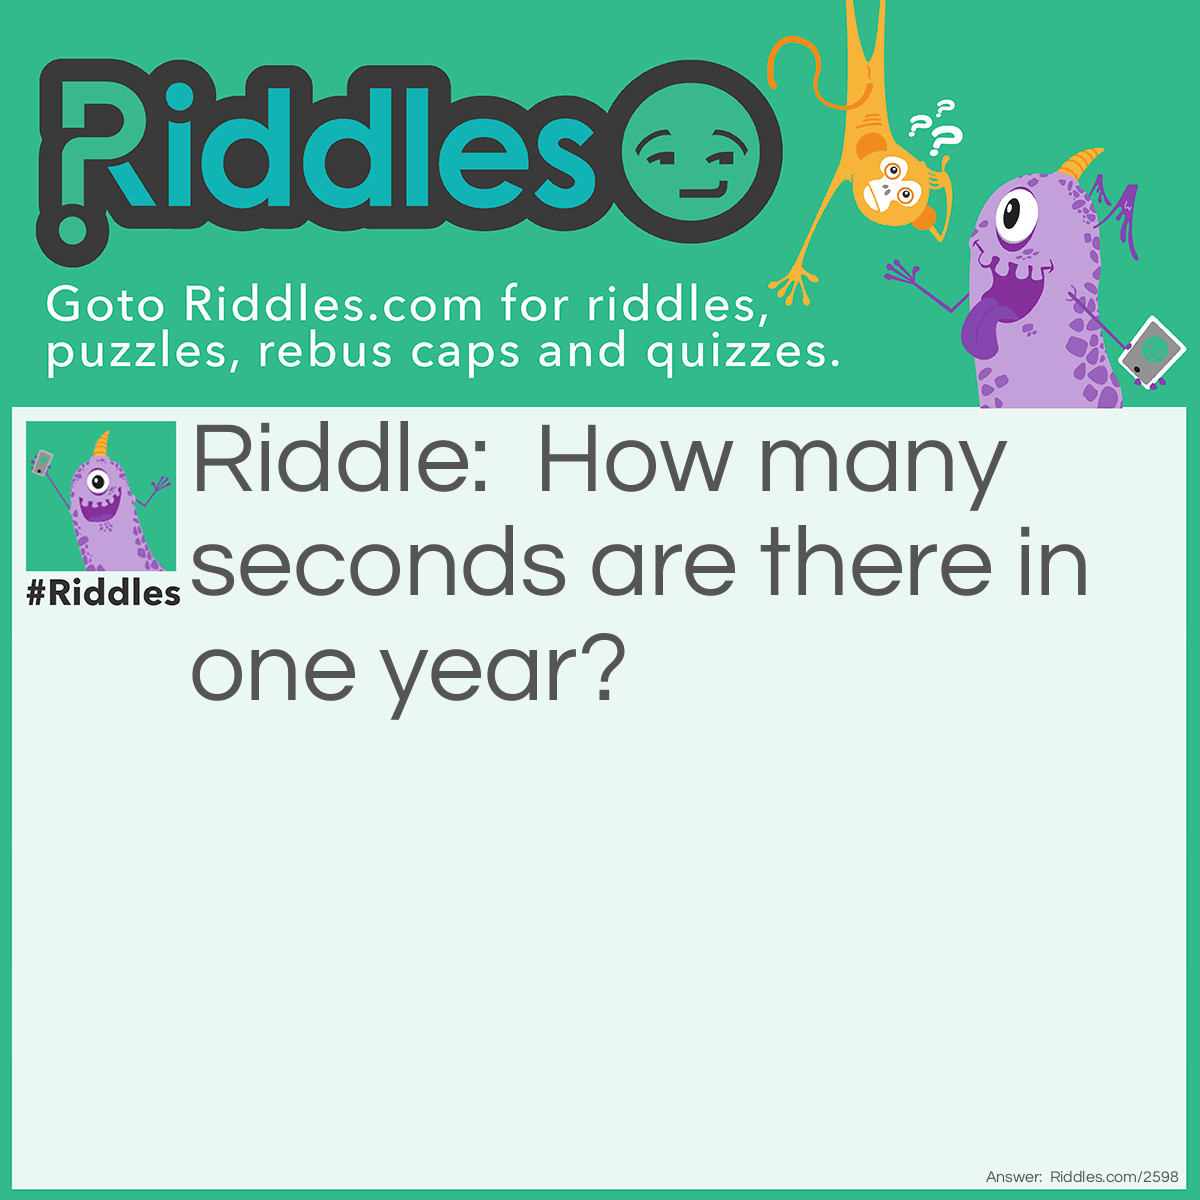 Riddle: How many seconds are there in one year? Answer: 12.  Every month has a 2nd.